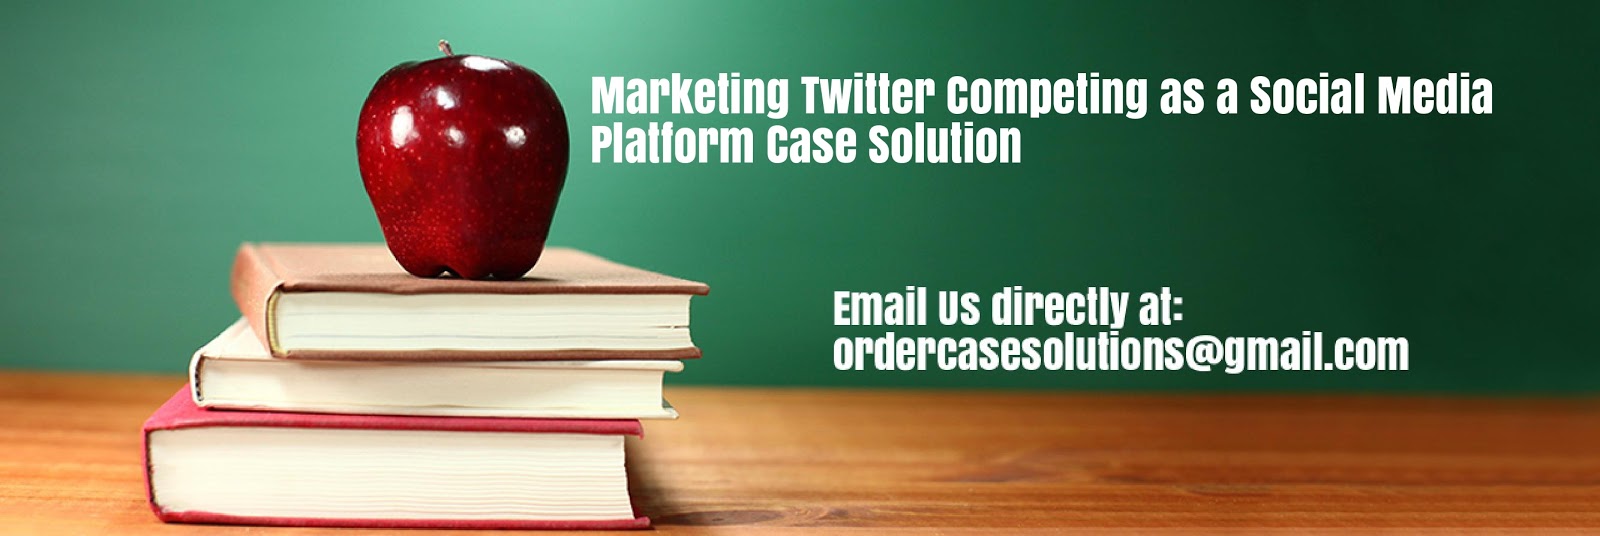 twitter case study solution